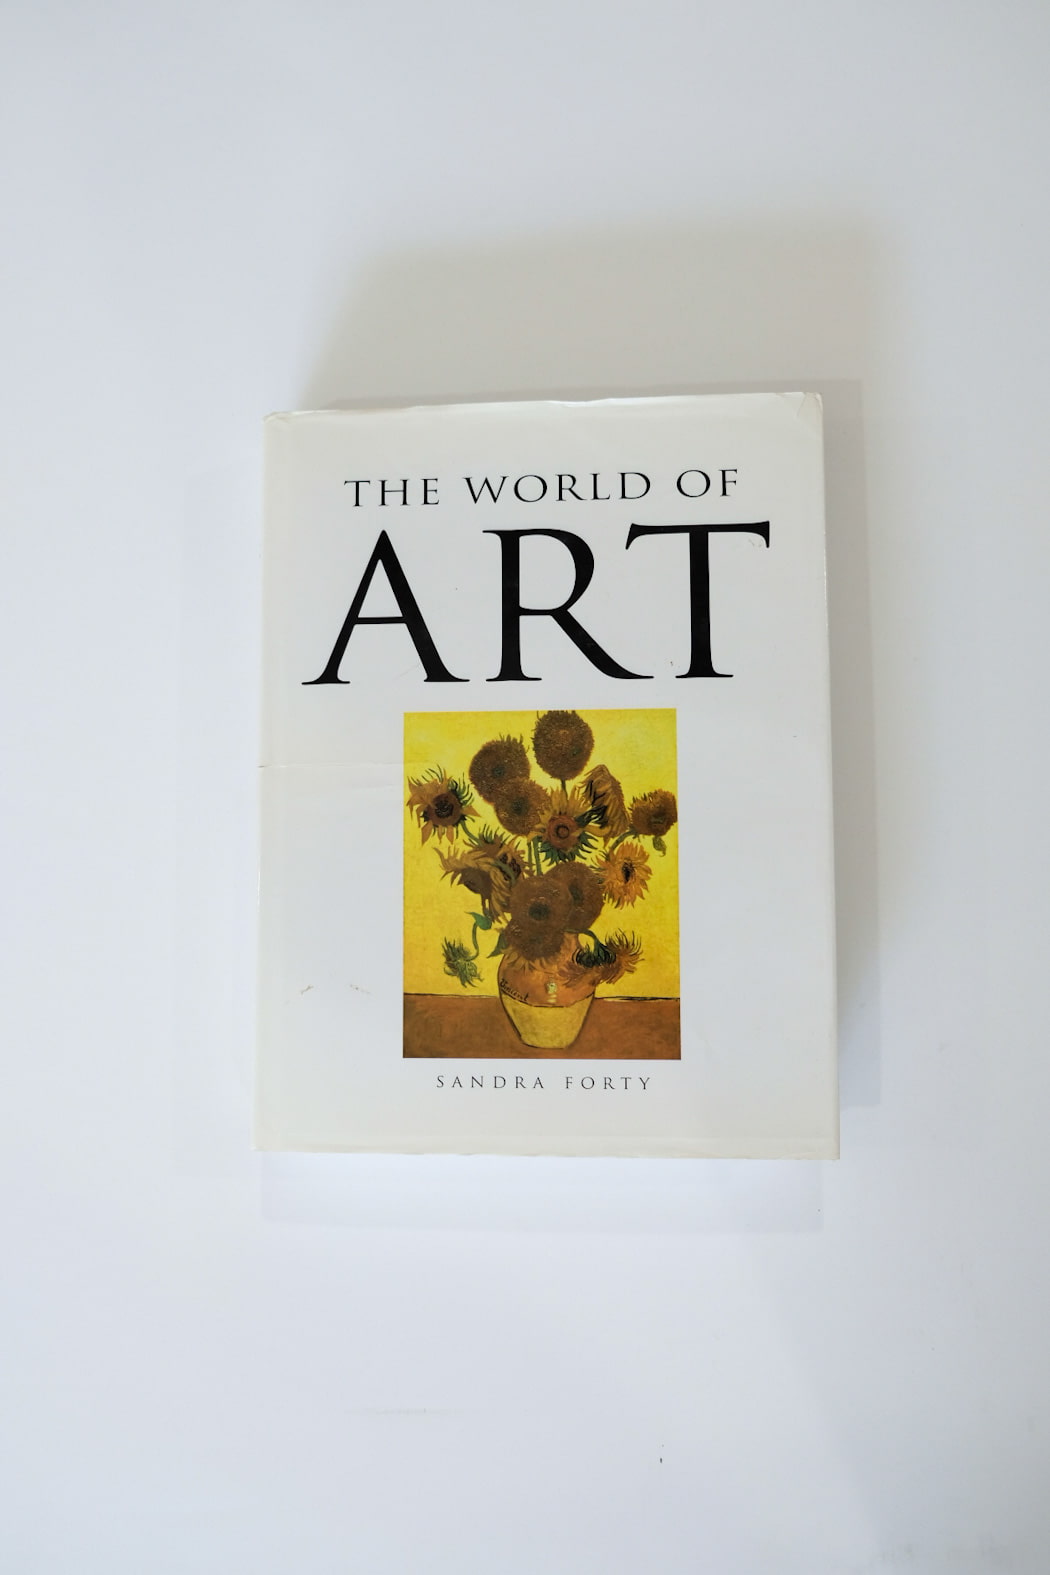 The World of Art by Sandra Forty